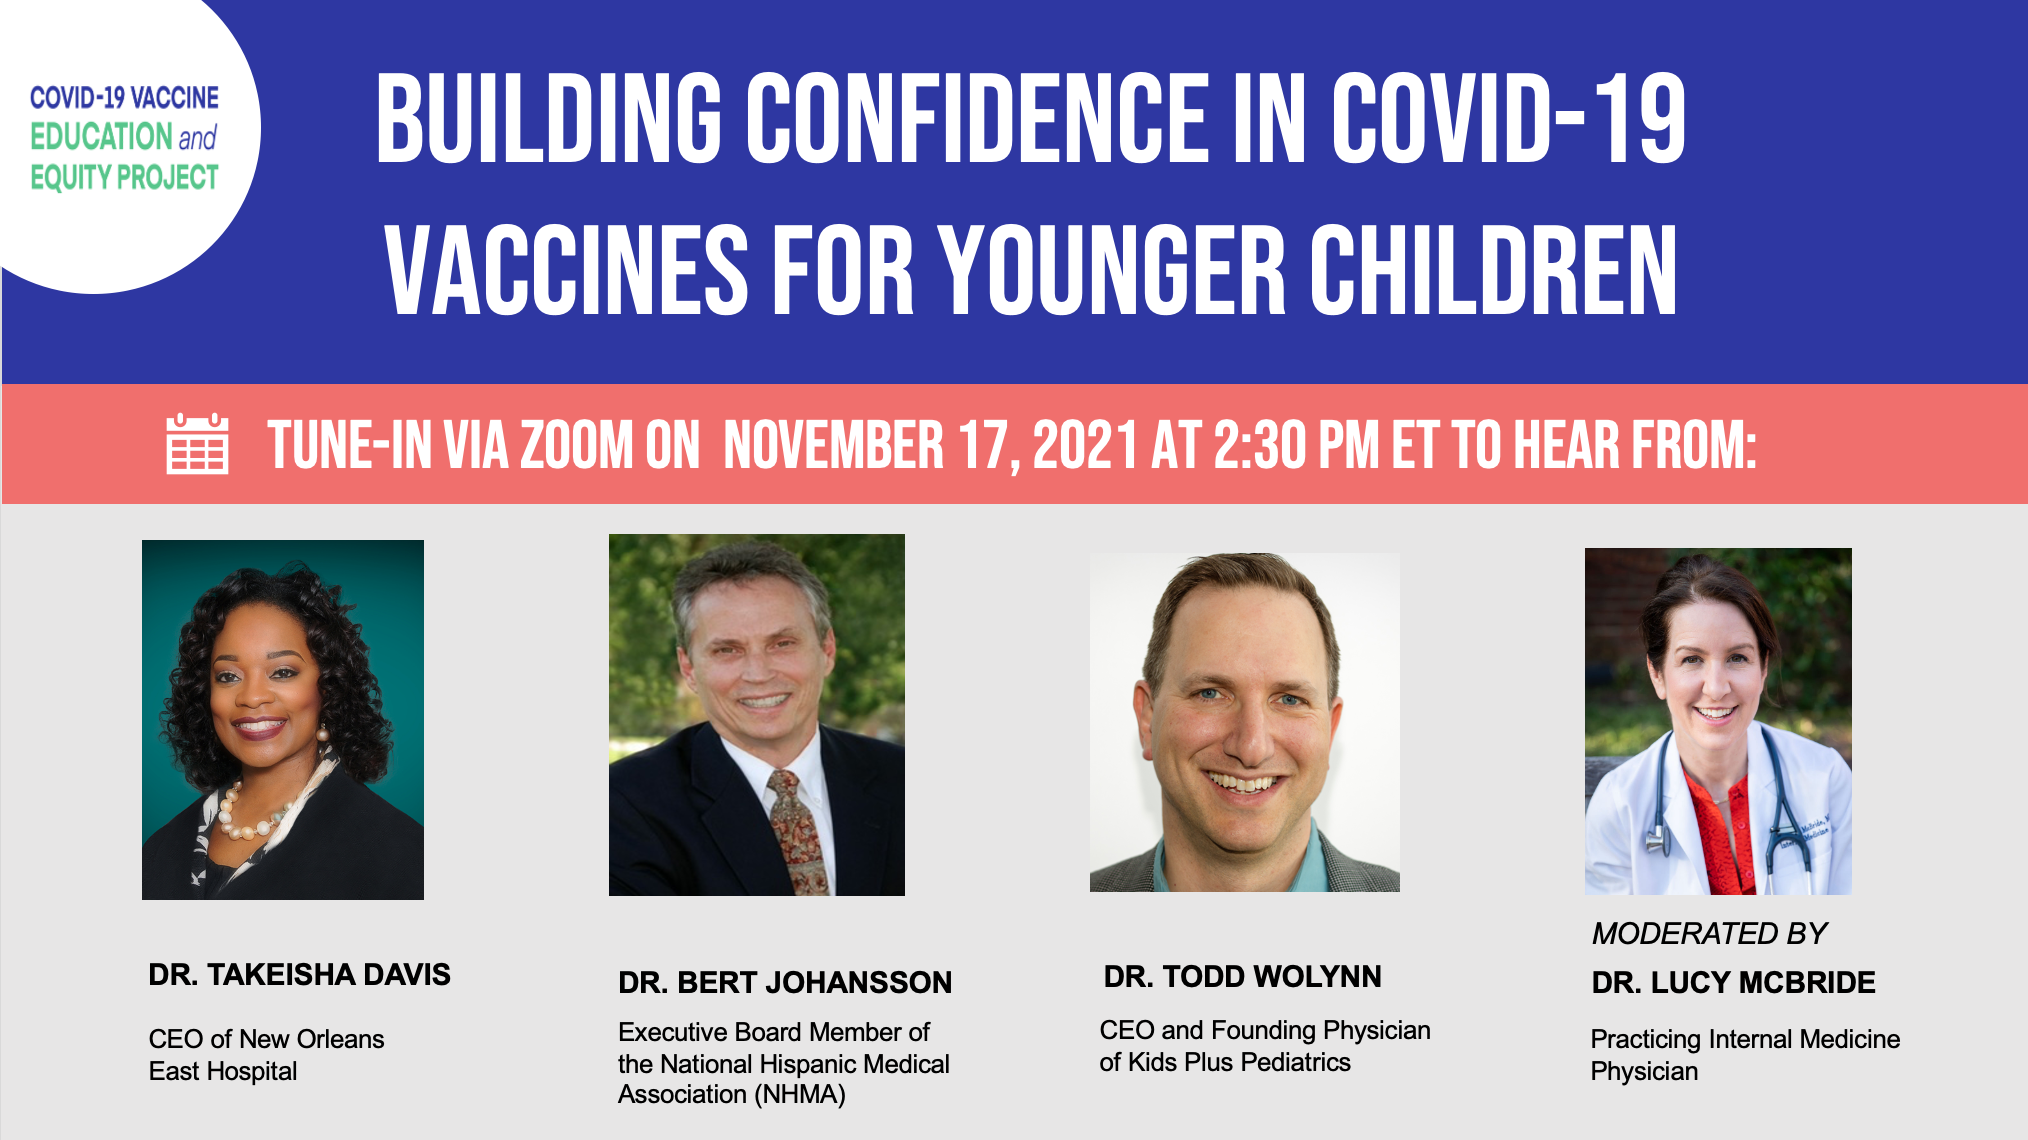 Building Confidence in COVID-19 Vaccines for Younger Children